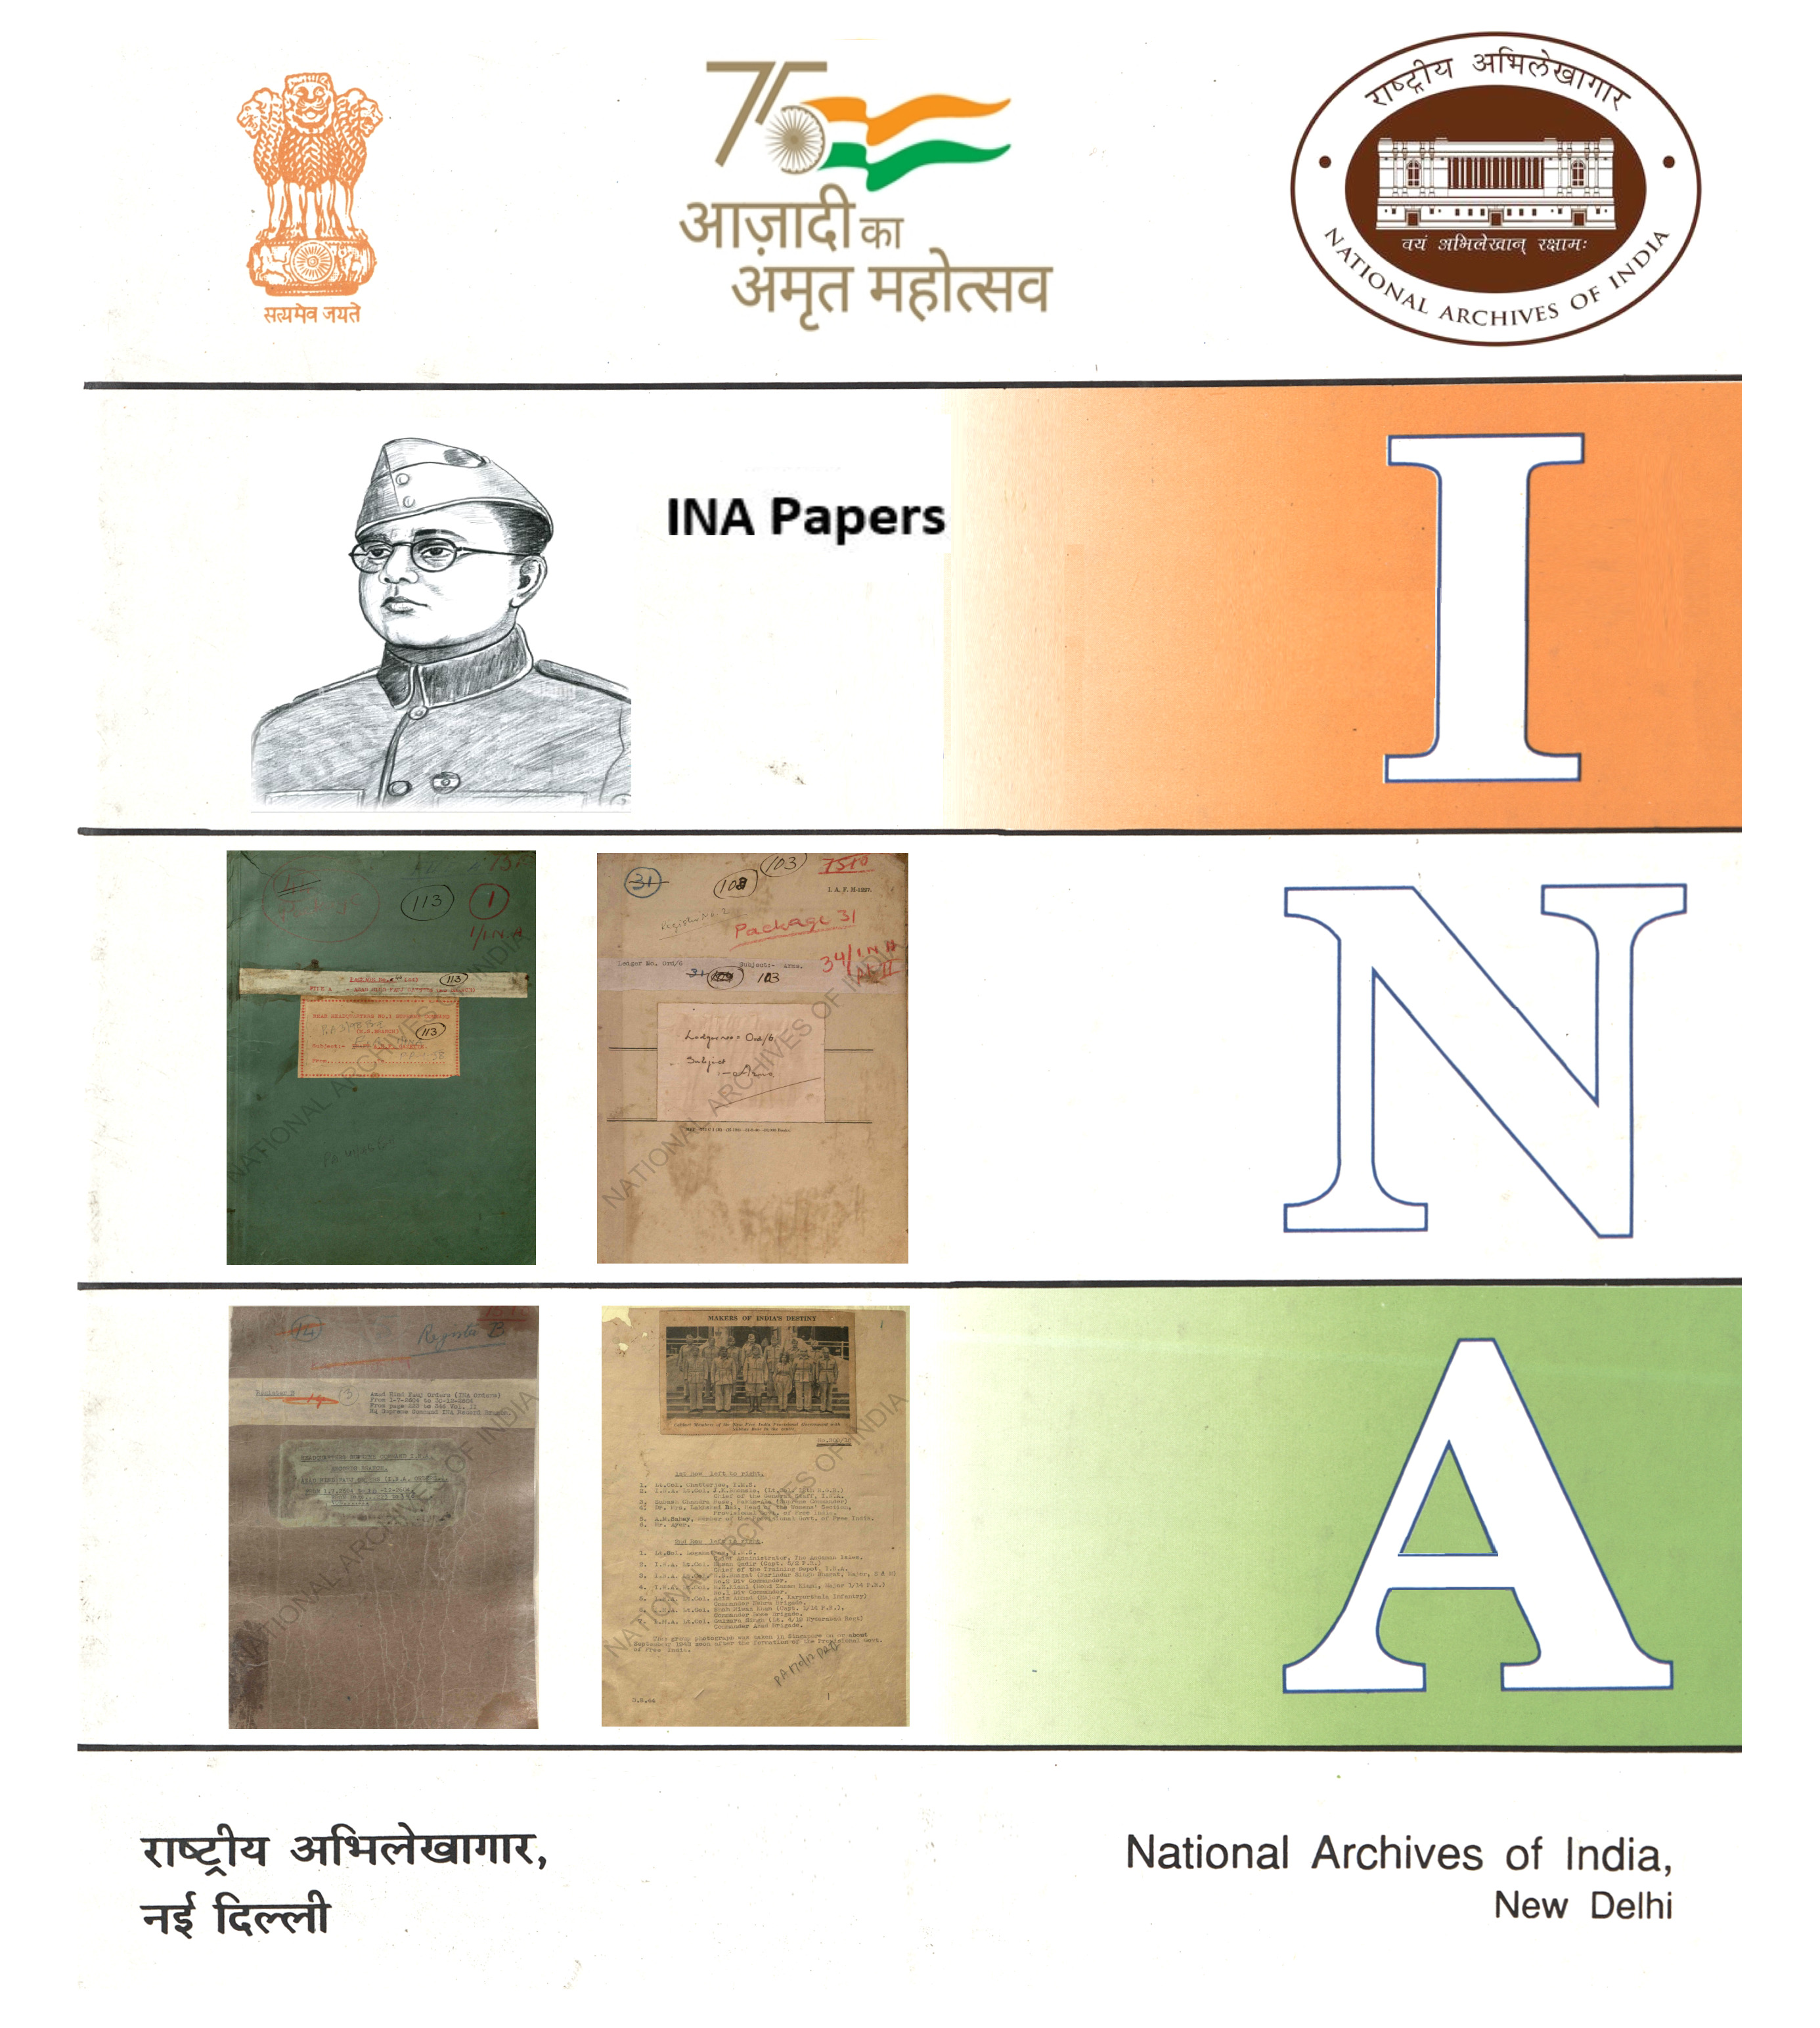 INA Papers